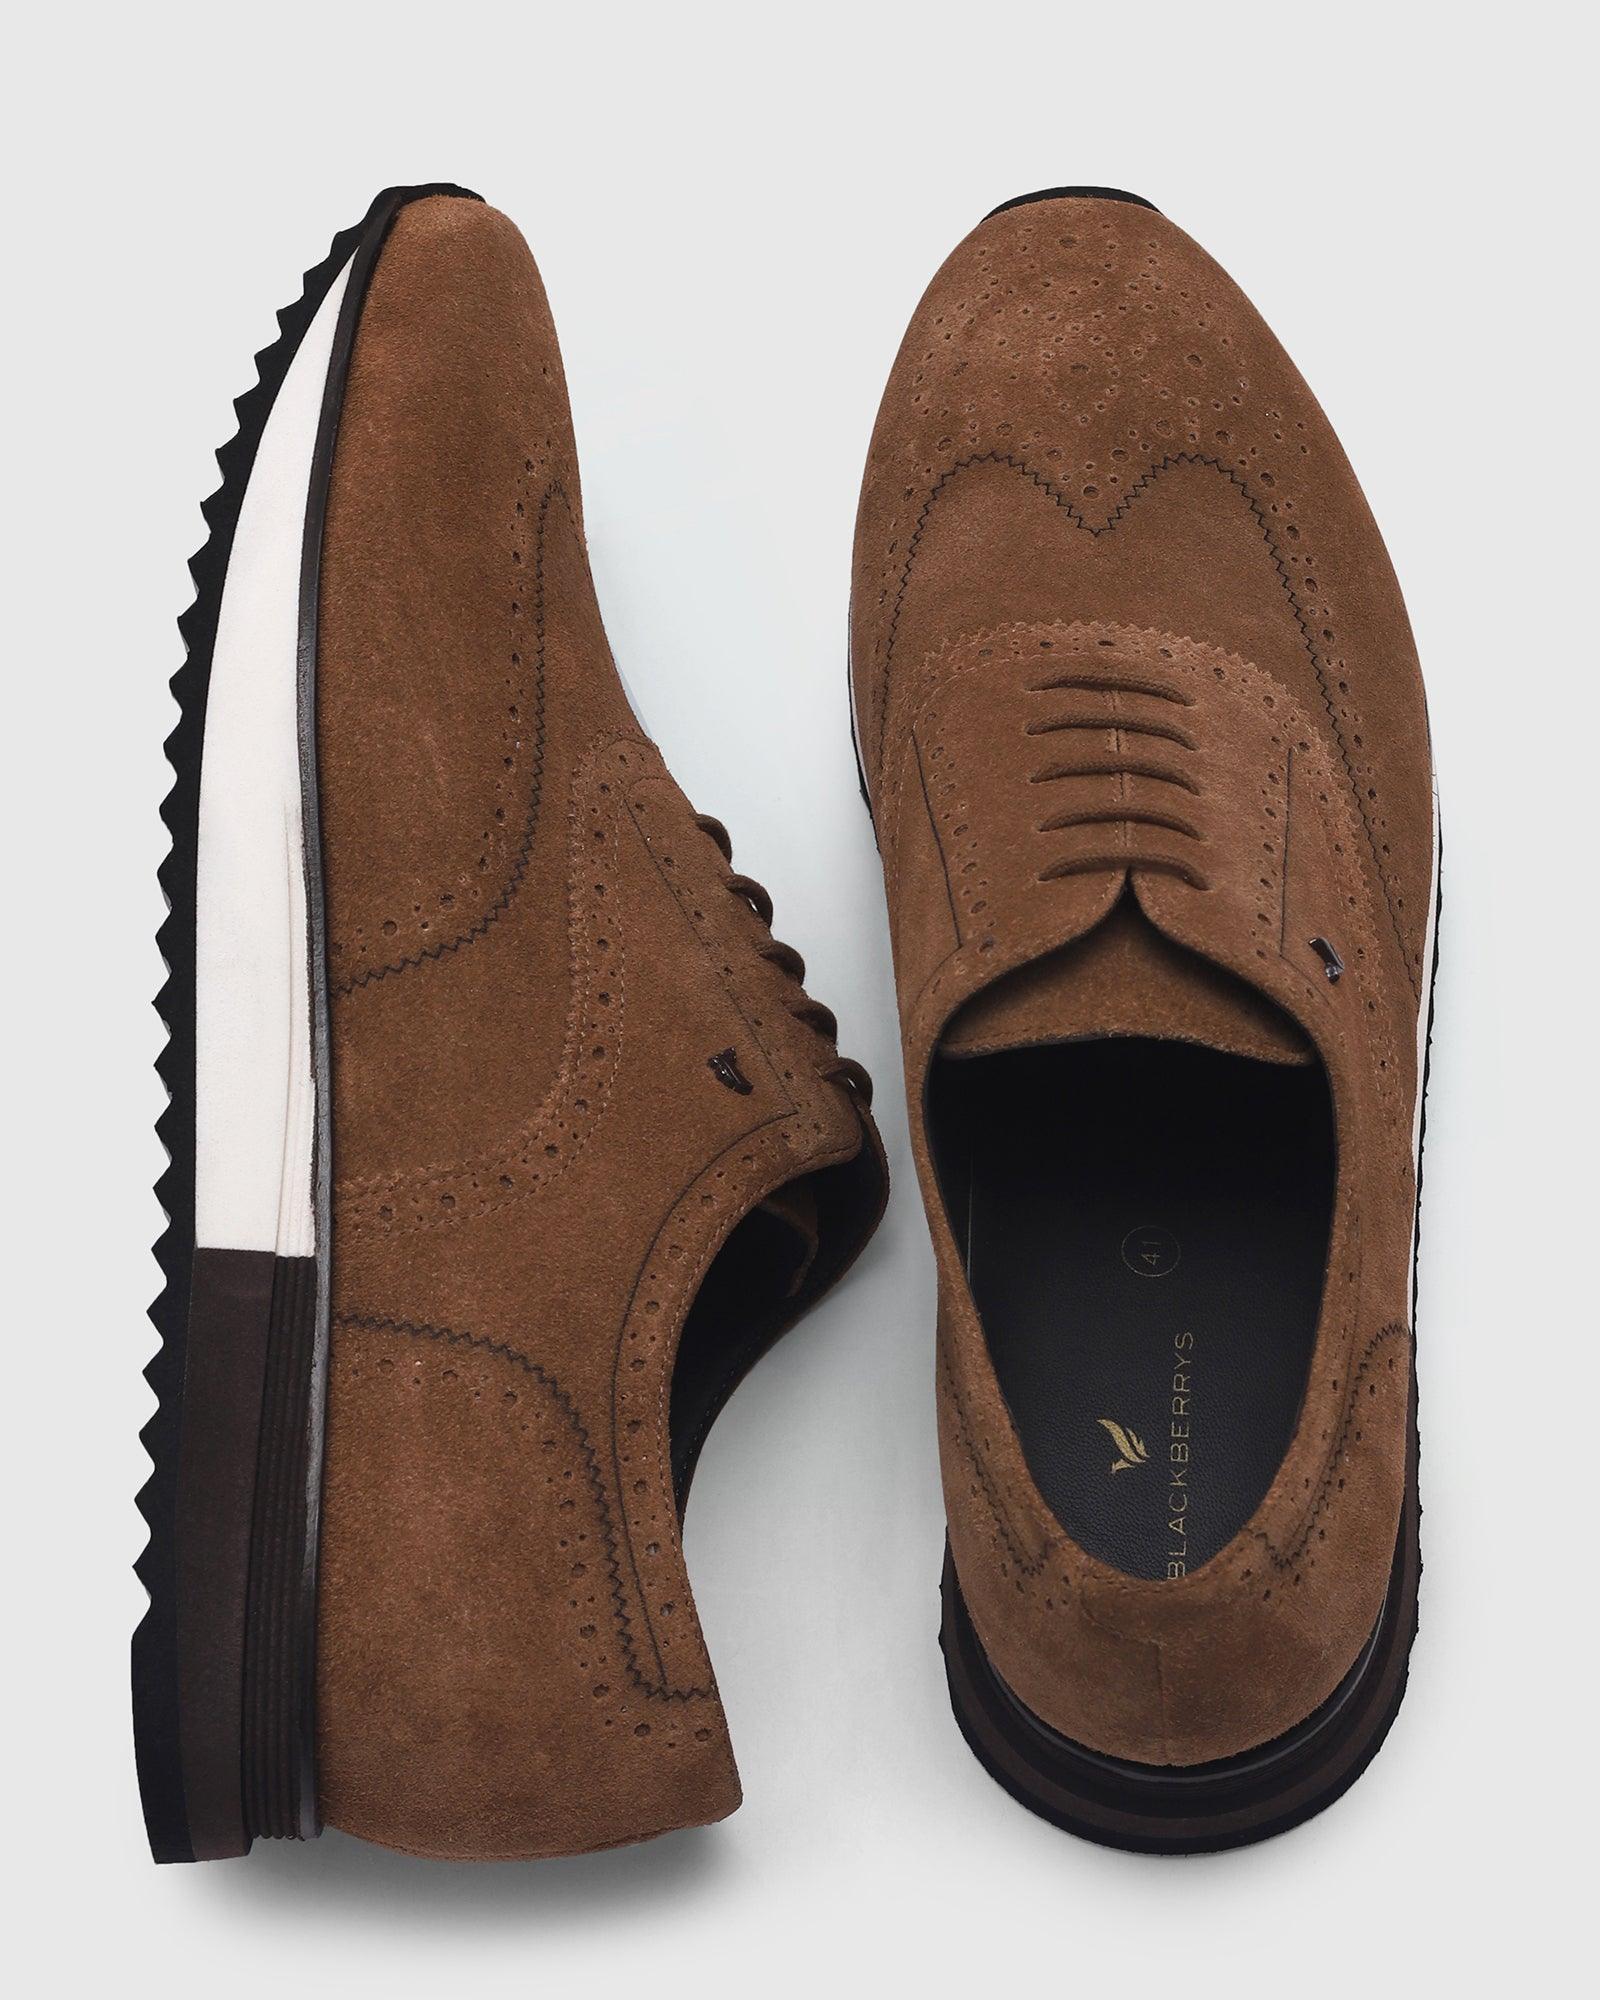 Leather Casual Brown Textured Sneakers - Poly